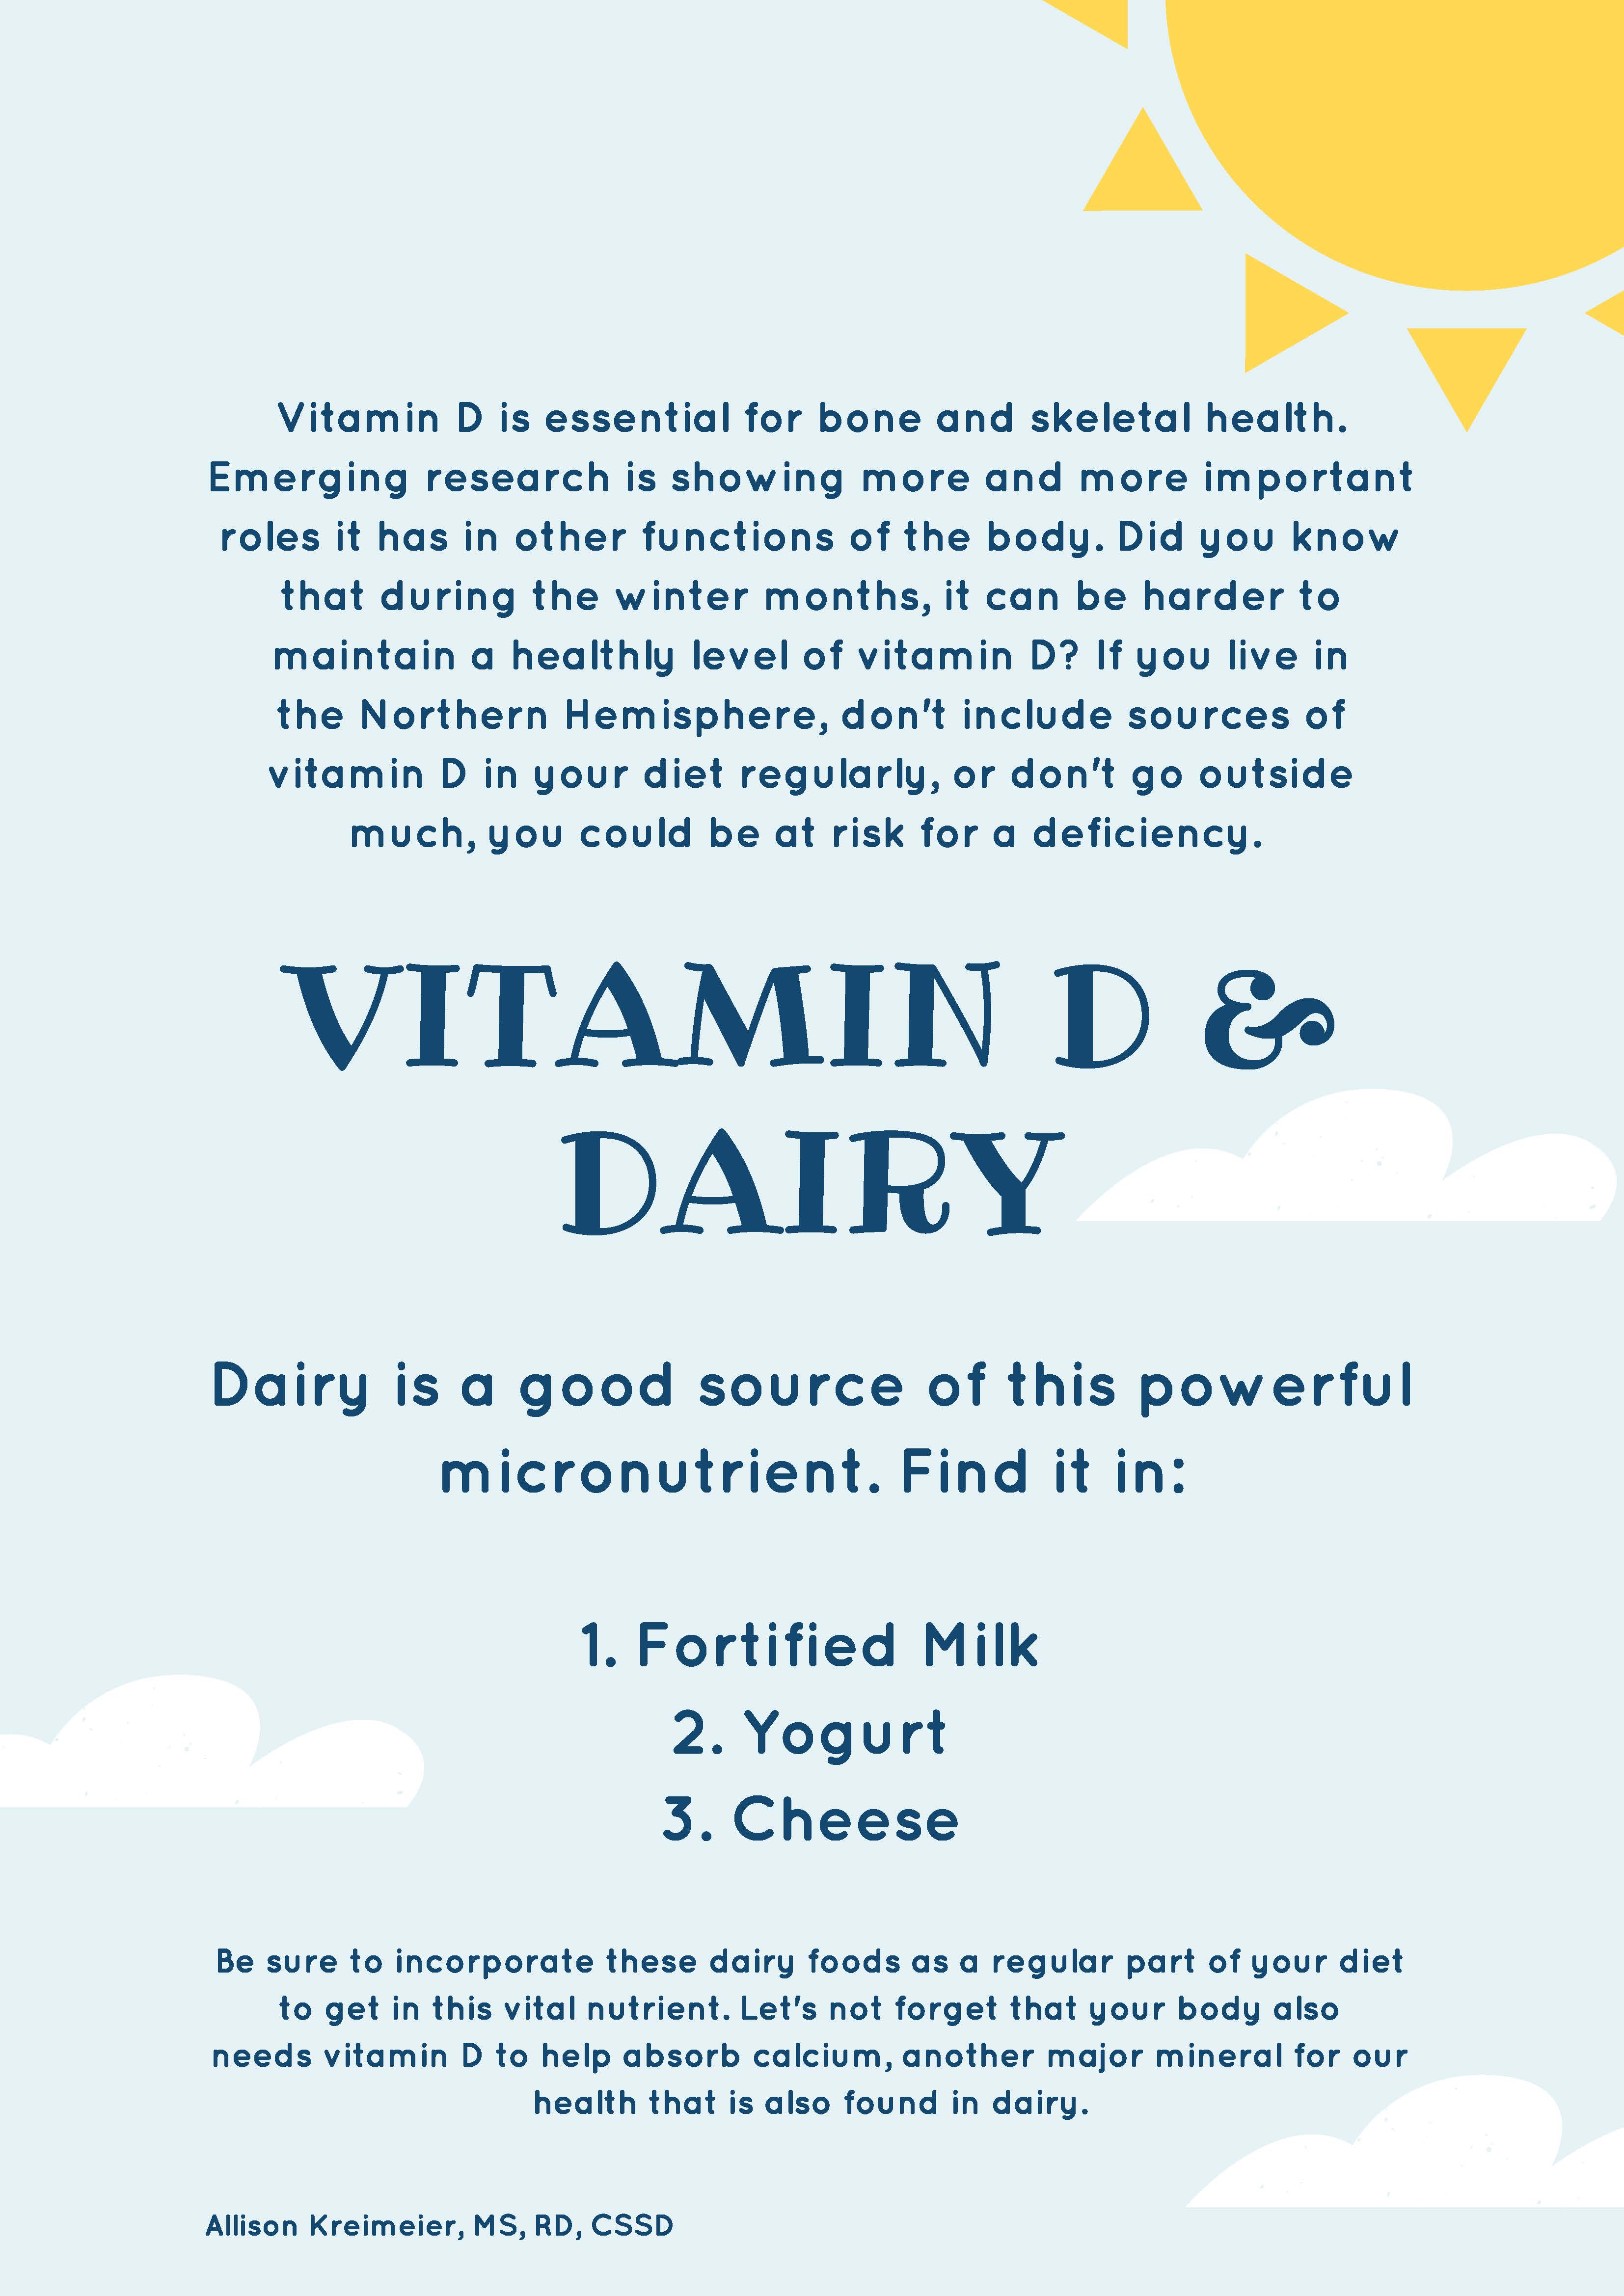 Vitamin D and Dairy